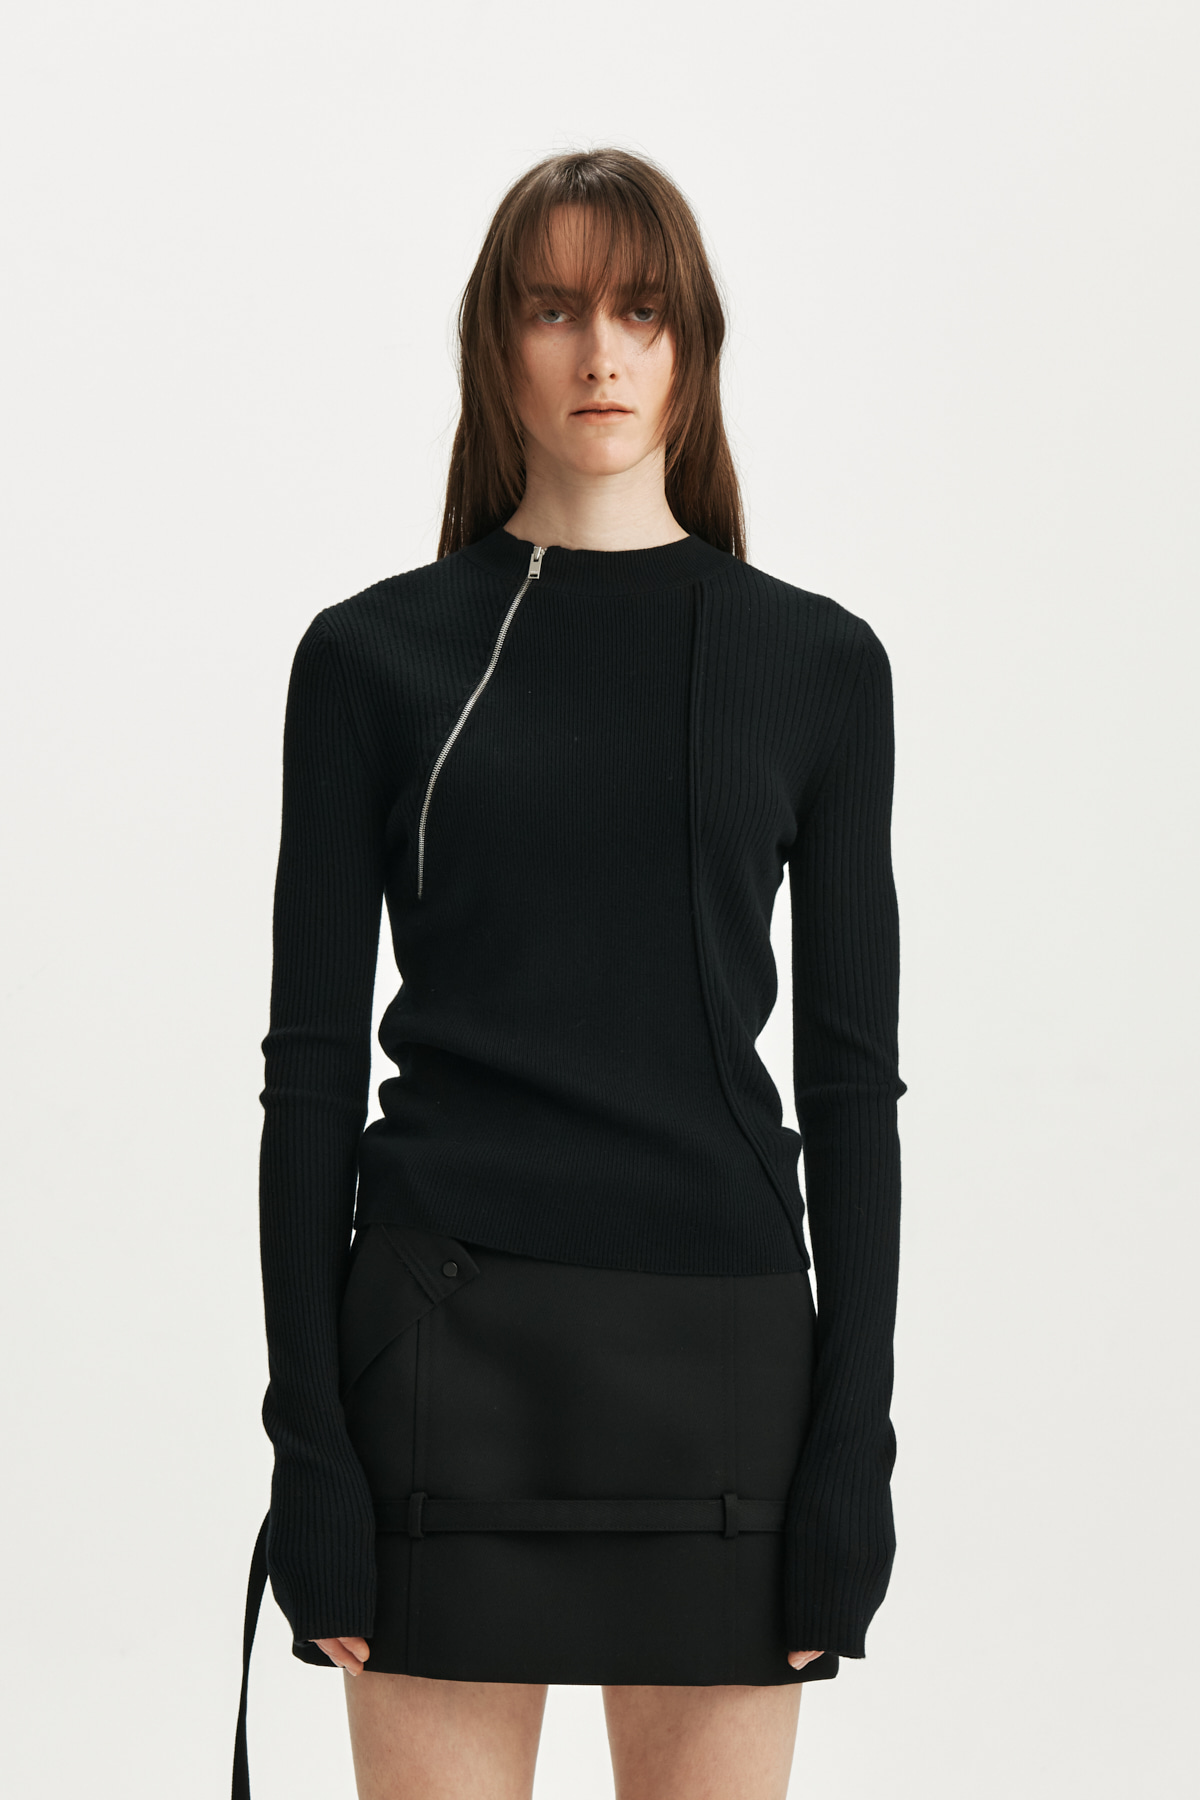 ZIPPER POINT KNIT PULLOVER IN BLACK